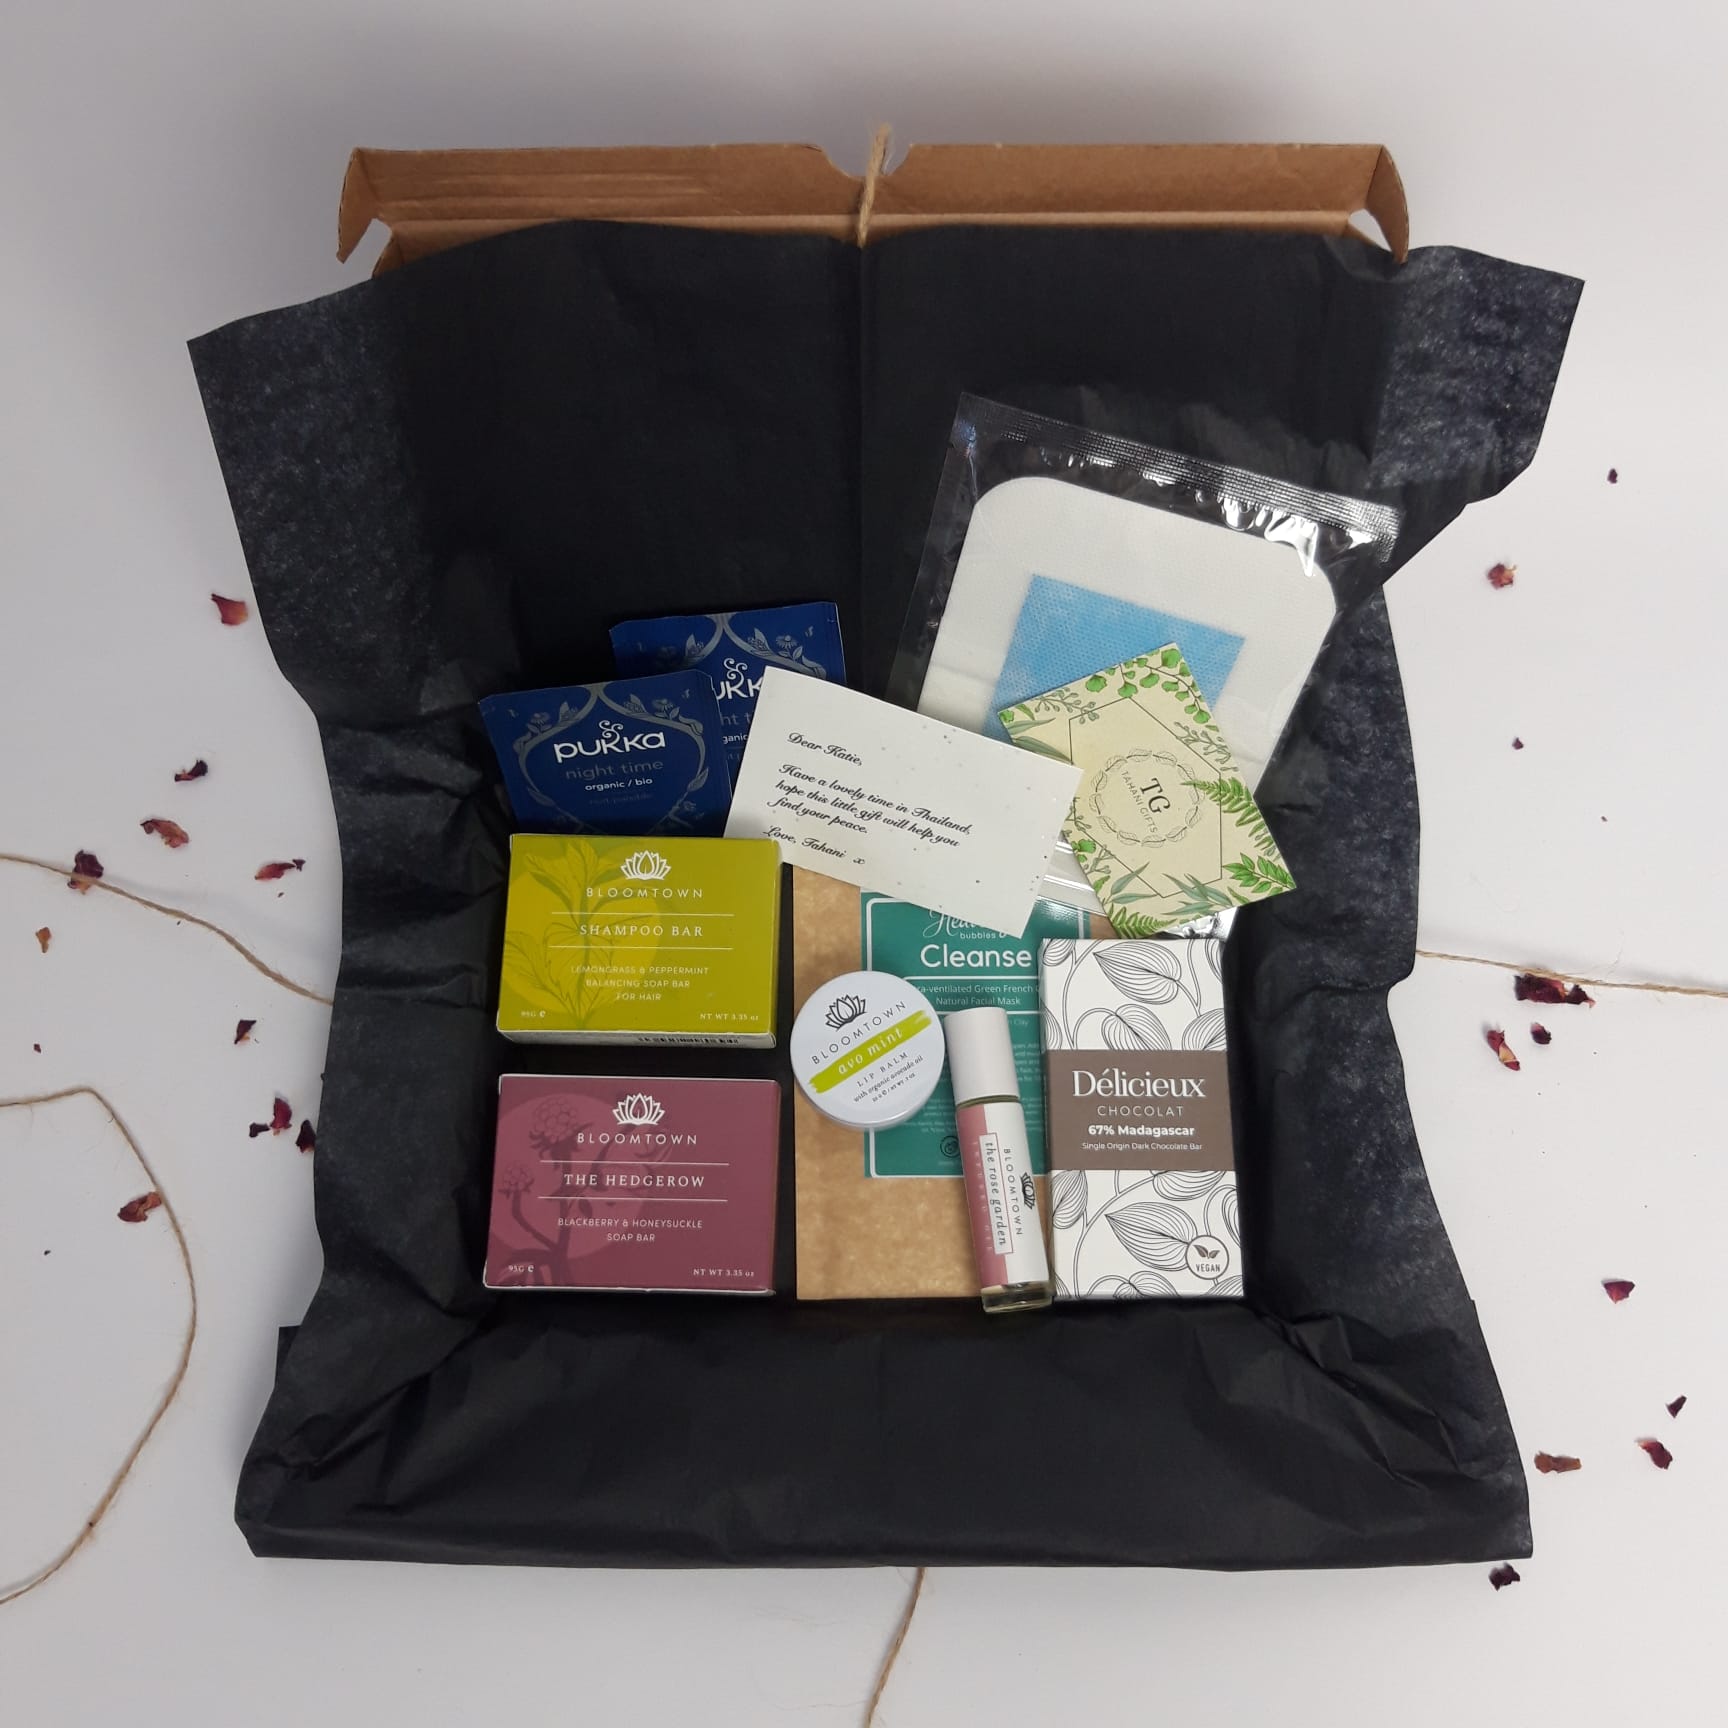 Our 'First-Class Wanderlust' is the essential gift to have when travelling. Includes our organic, handcrafted soap, shampoo bar, lip balm, scented roll on infuse, face mask, teas, and chocolate. 